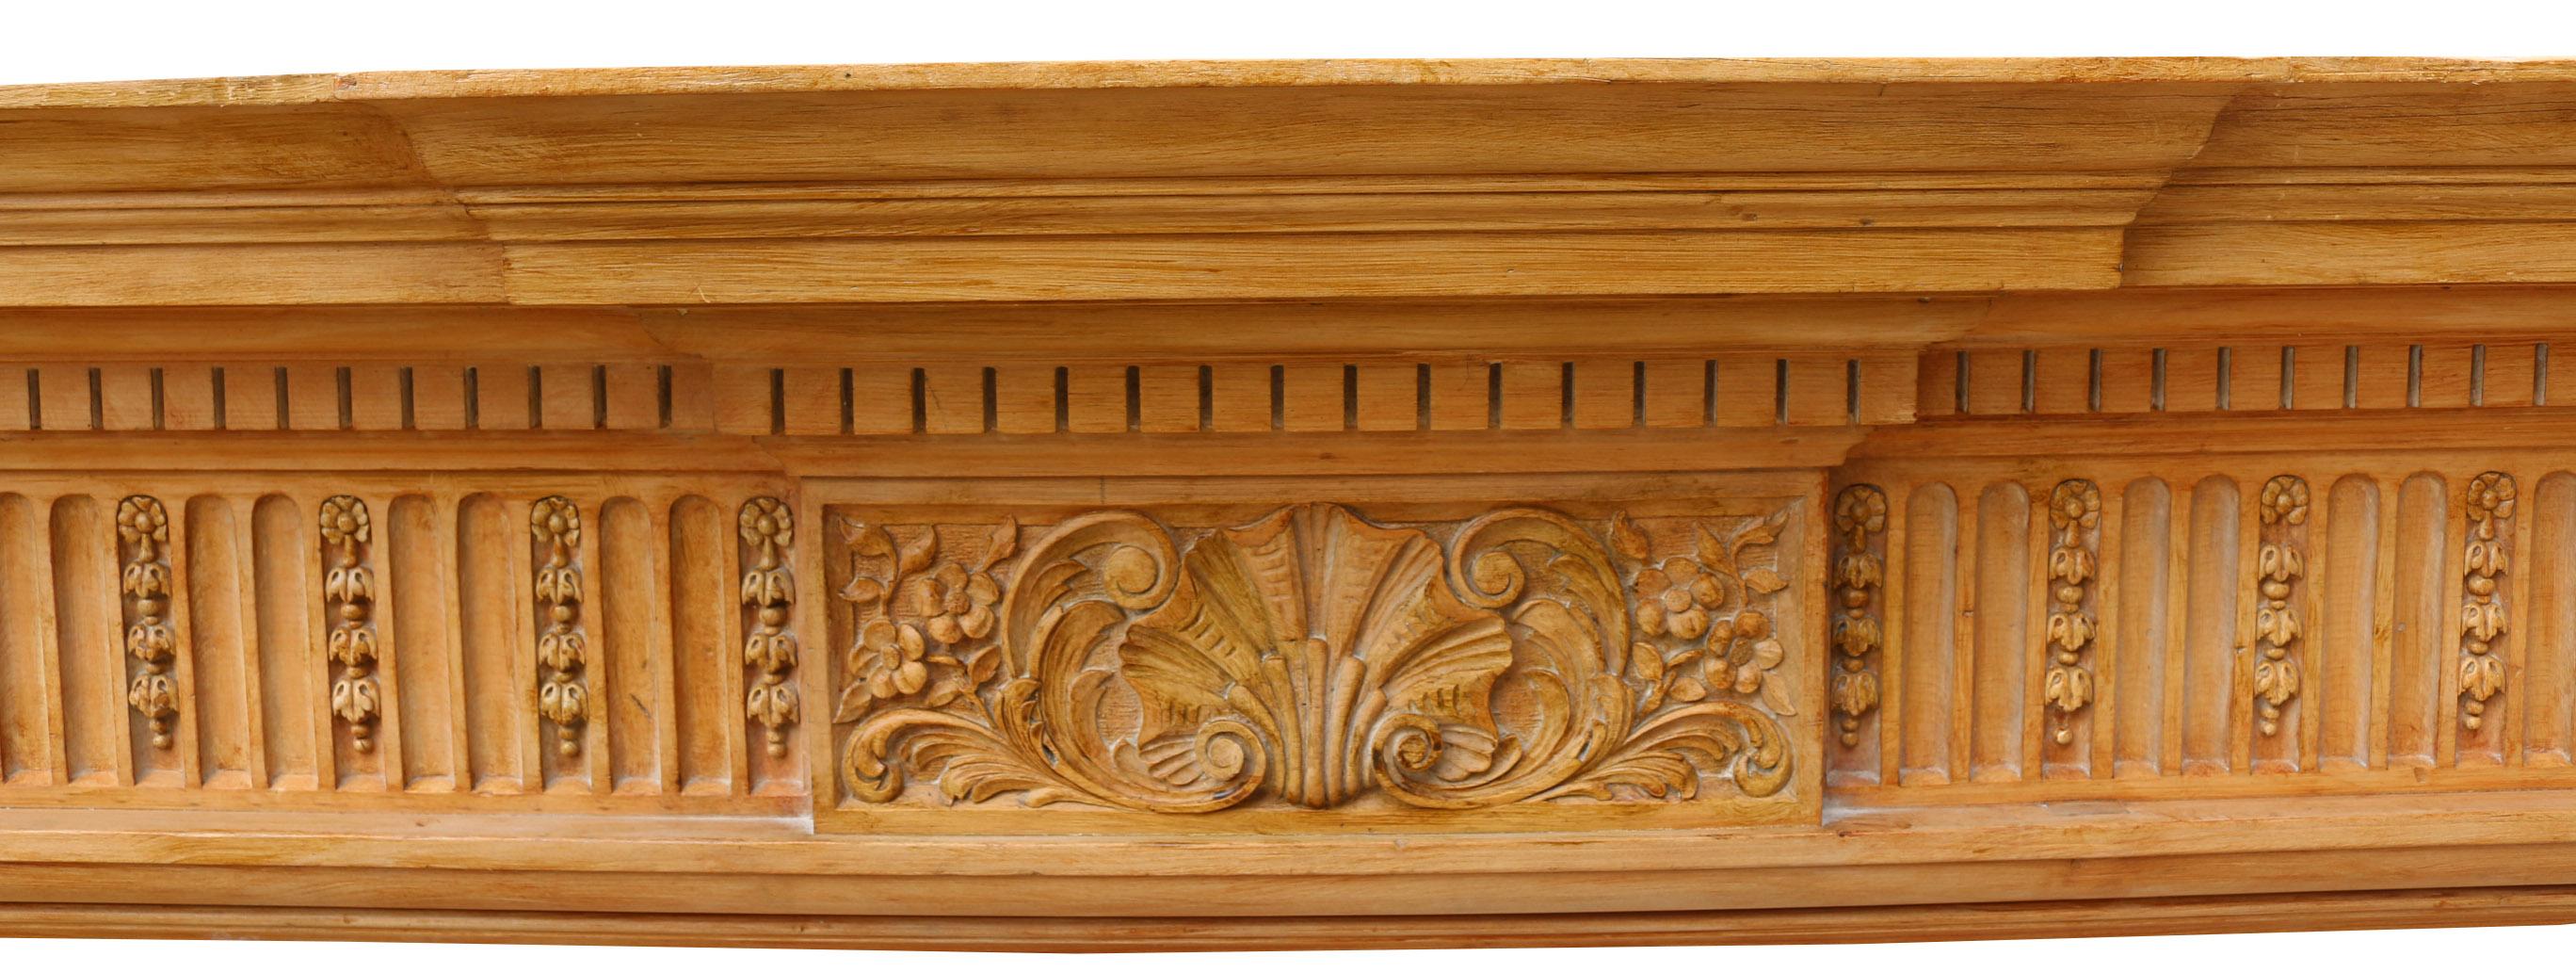 Antique Georgian Style Carved Pine Fire Surround In Good Condition For Sale In Wormelow, Herefordshire